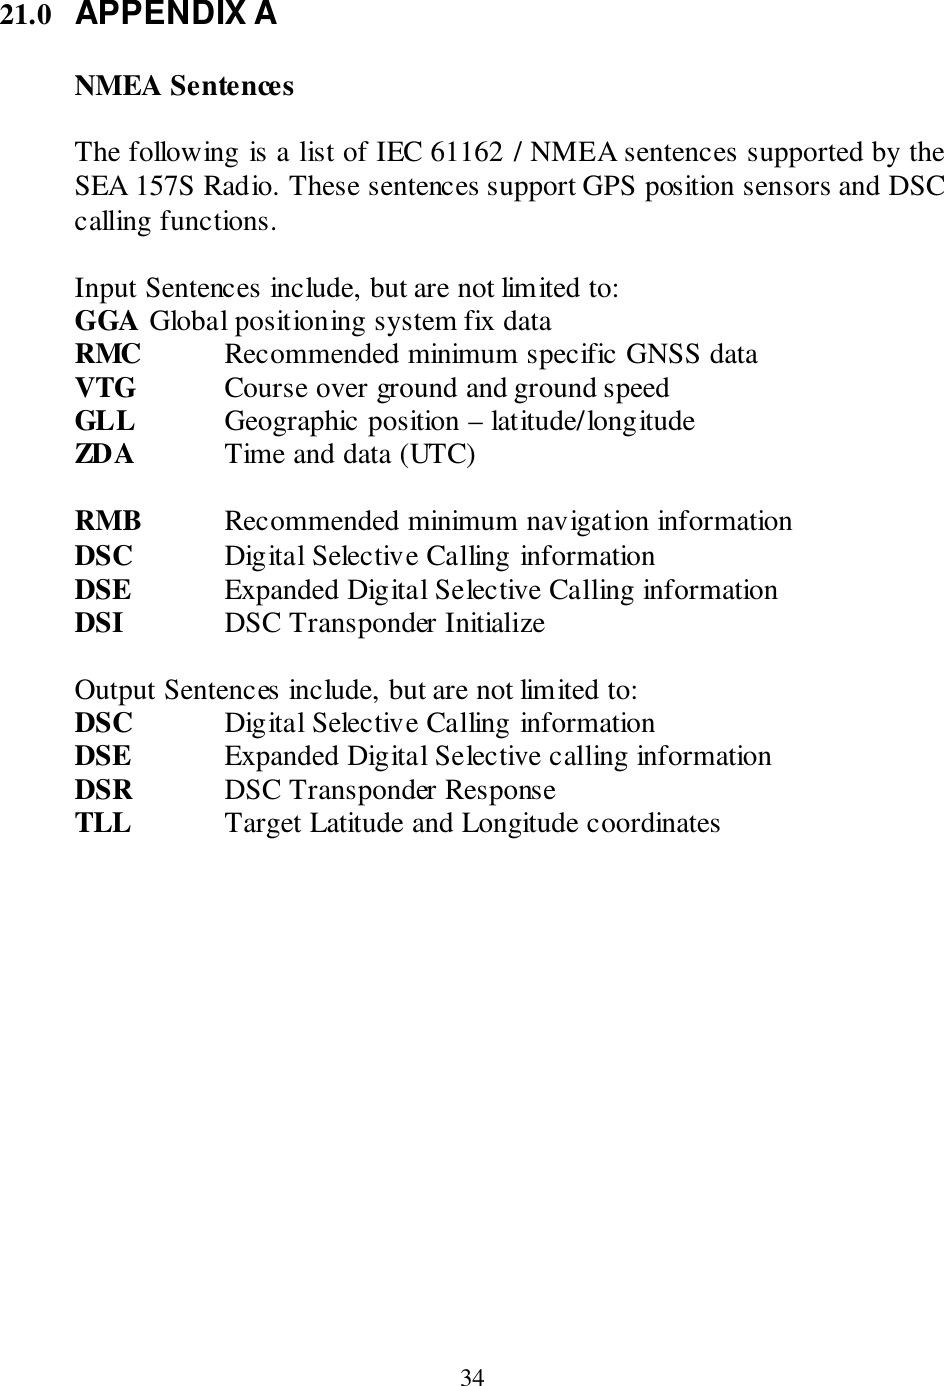  34 21.0 APPENDIX A  NMEA Sentences  The following is a list of IEC 61162 / NMEA sentences supported by the SEA 157S Radio. These sentences support GPS position sensors and DSC calling functions.  Input Sentences include, but are not limited to: GGA  Global positioning system fix data RMC   Recommended minimum specific GNSS data VTG    Course over ground and ground speed GLL    Geographic position – latitude/longitude  ZDA    Time and data (UTC)  RMB   Recommended minimum navigation information DSC    Digital Selective Calling information DSE    Expanded Digital Selective Calling information DSI     DSC Transponder Initialize      Output Sentences include, but are not limited to: DSC    Digital Selective Calling information DSE    Expanded Digital Selective calling information  DSR    DSC Transponder Response TLL    Target Latitude and Longitude coordinates          